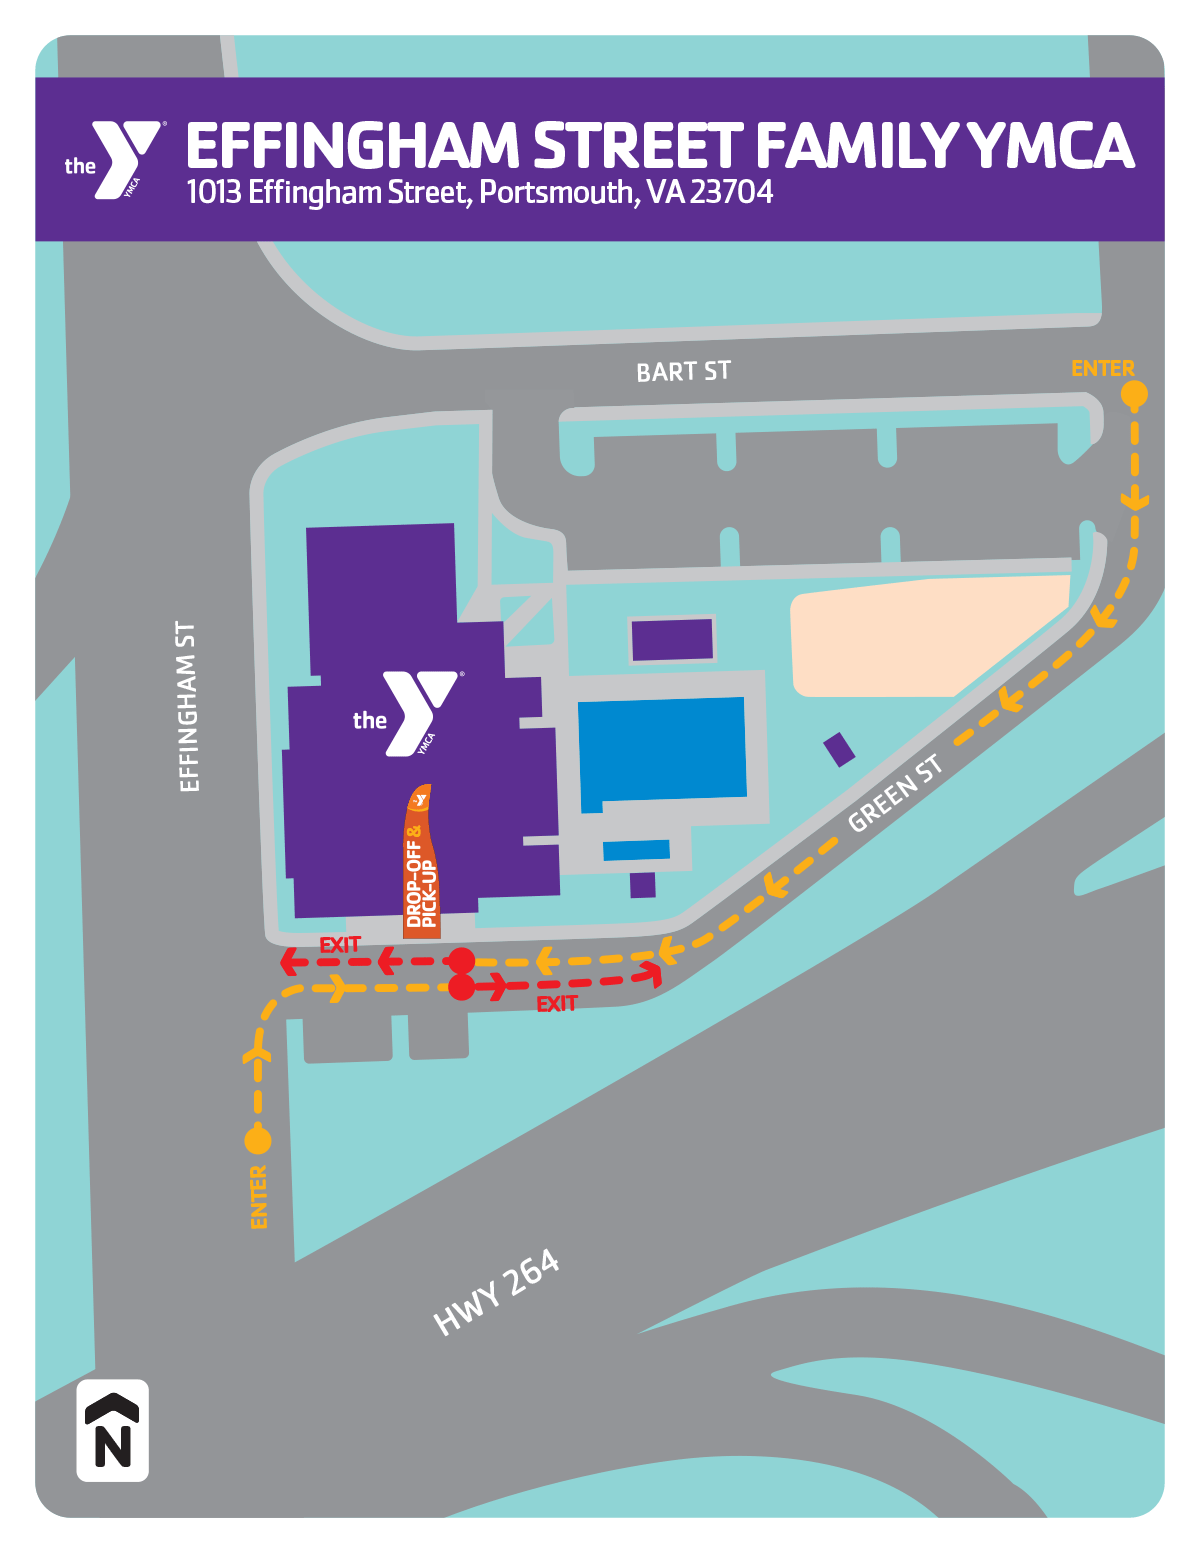 Summer camp drop-off & pick-up locations for the Effingham Street Family YMCA